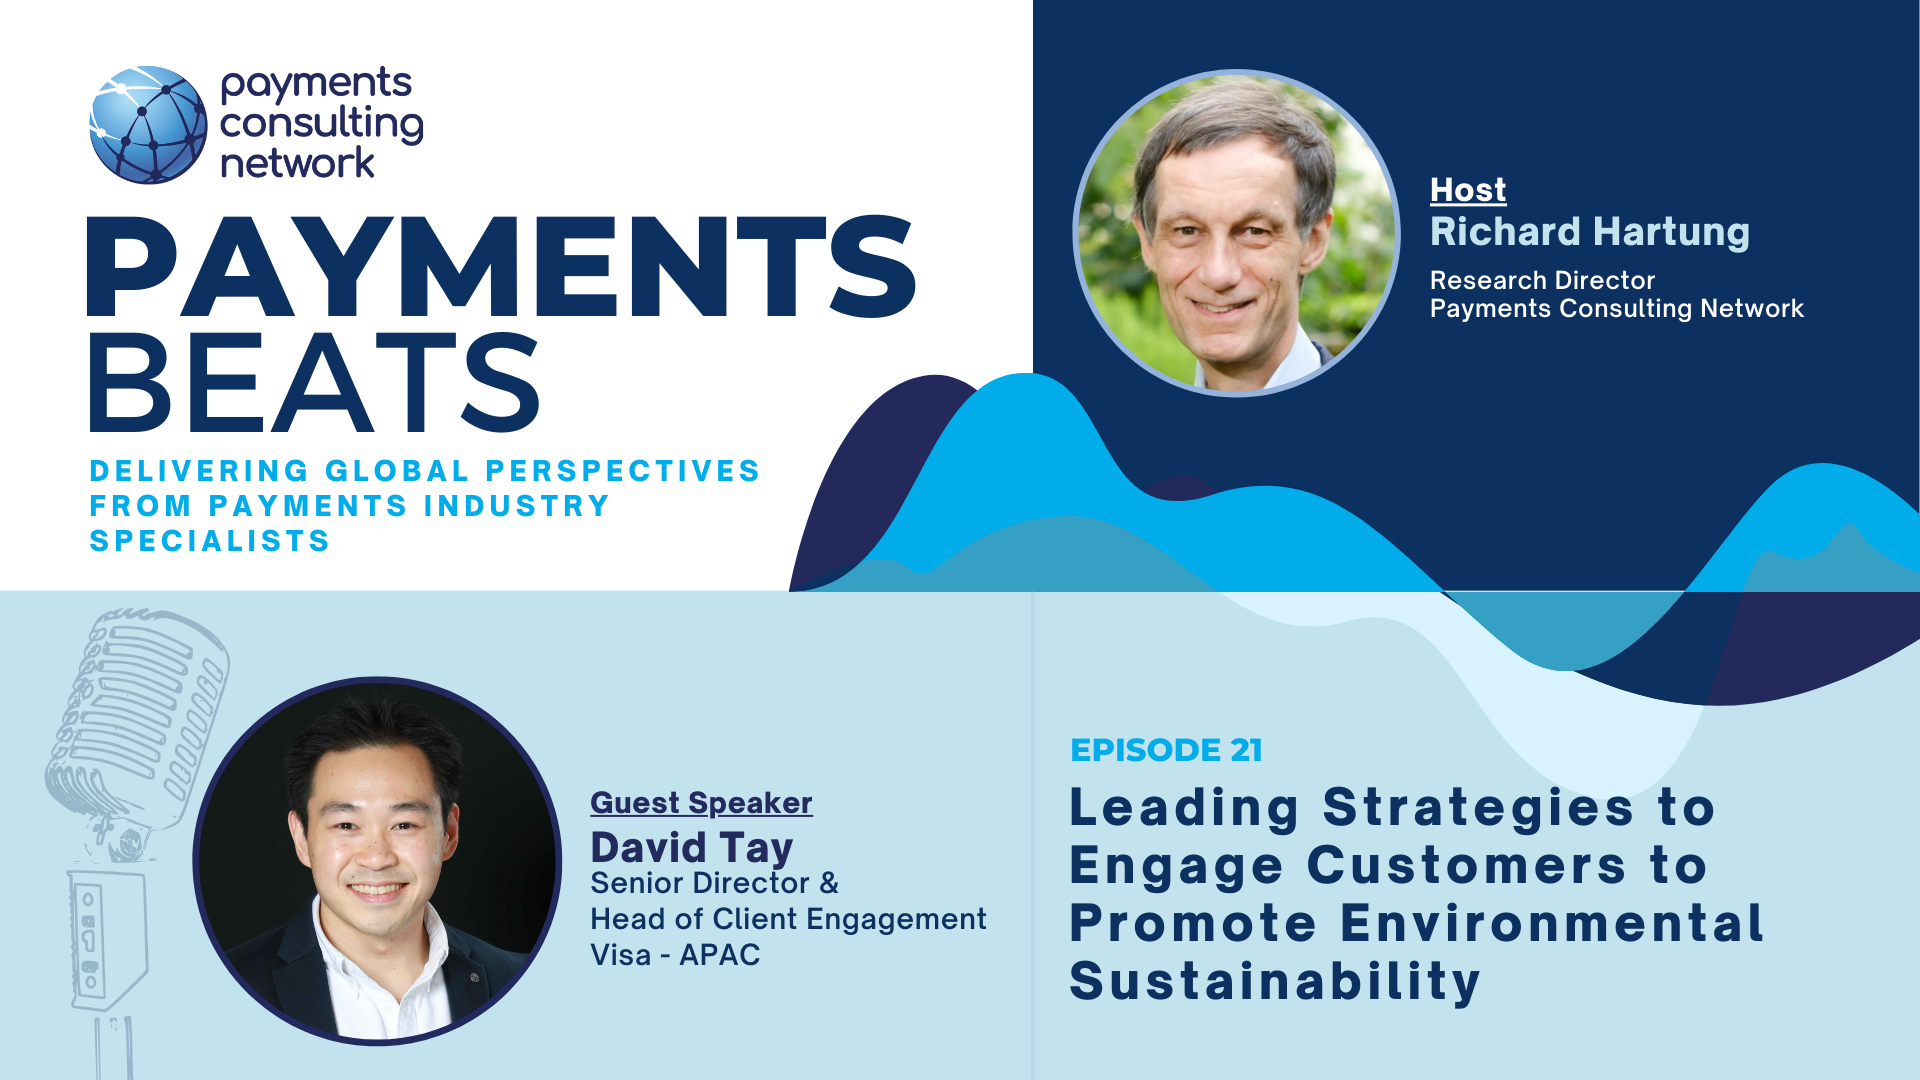 Episode 21 - Leading Strategies to Engage Customers to Promote Environmental Sustainability